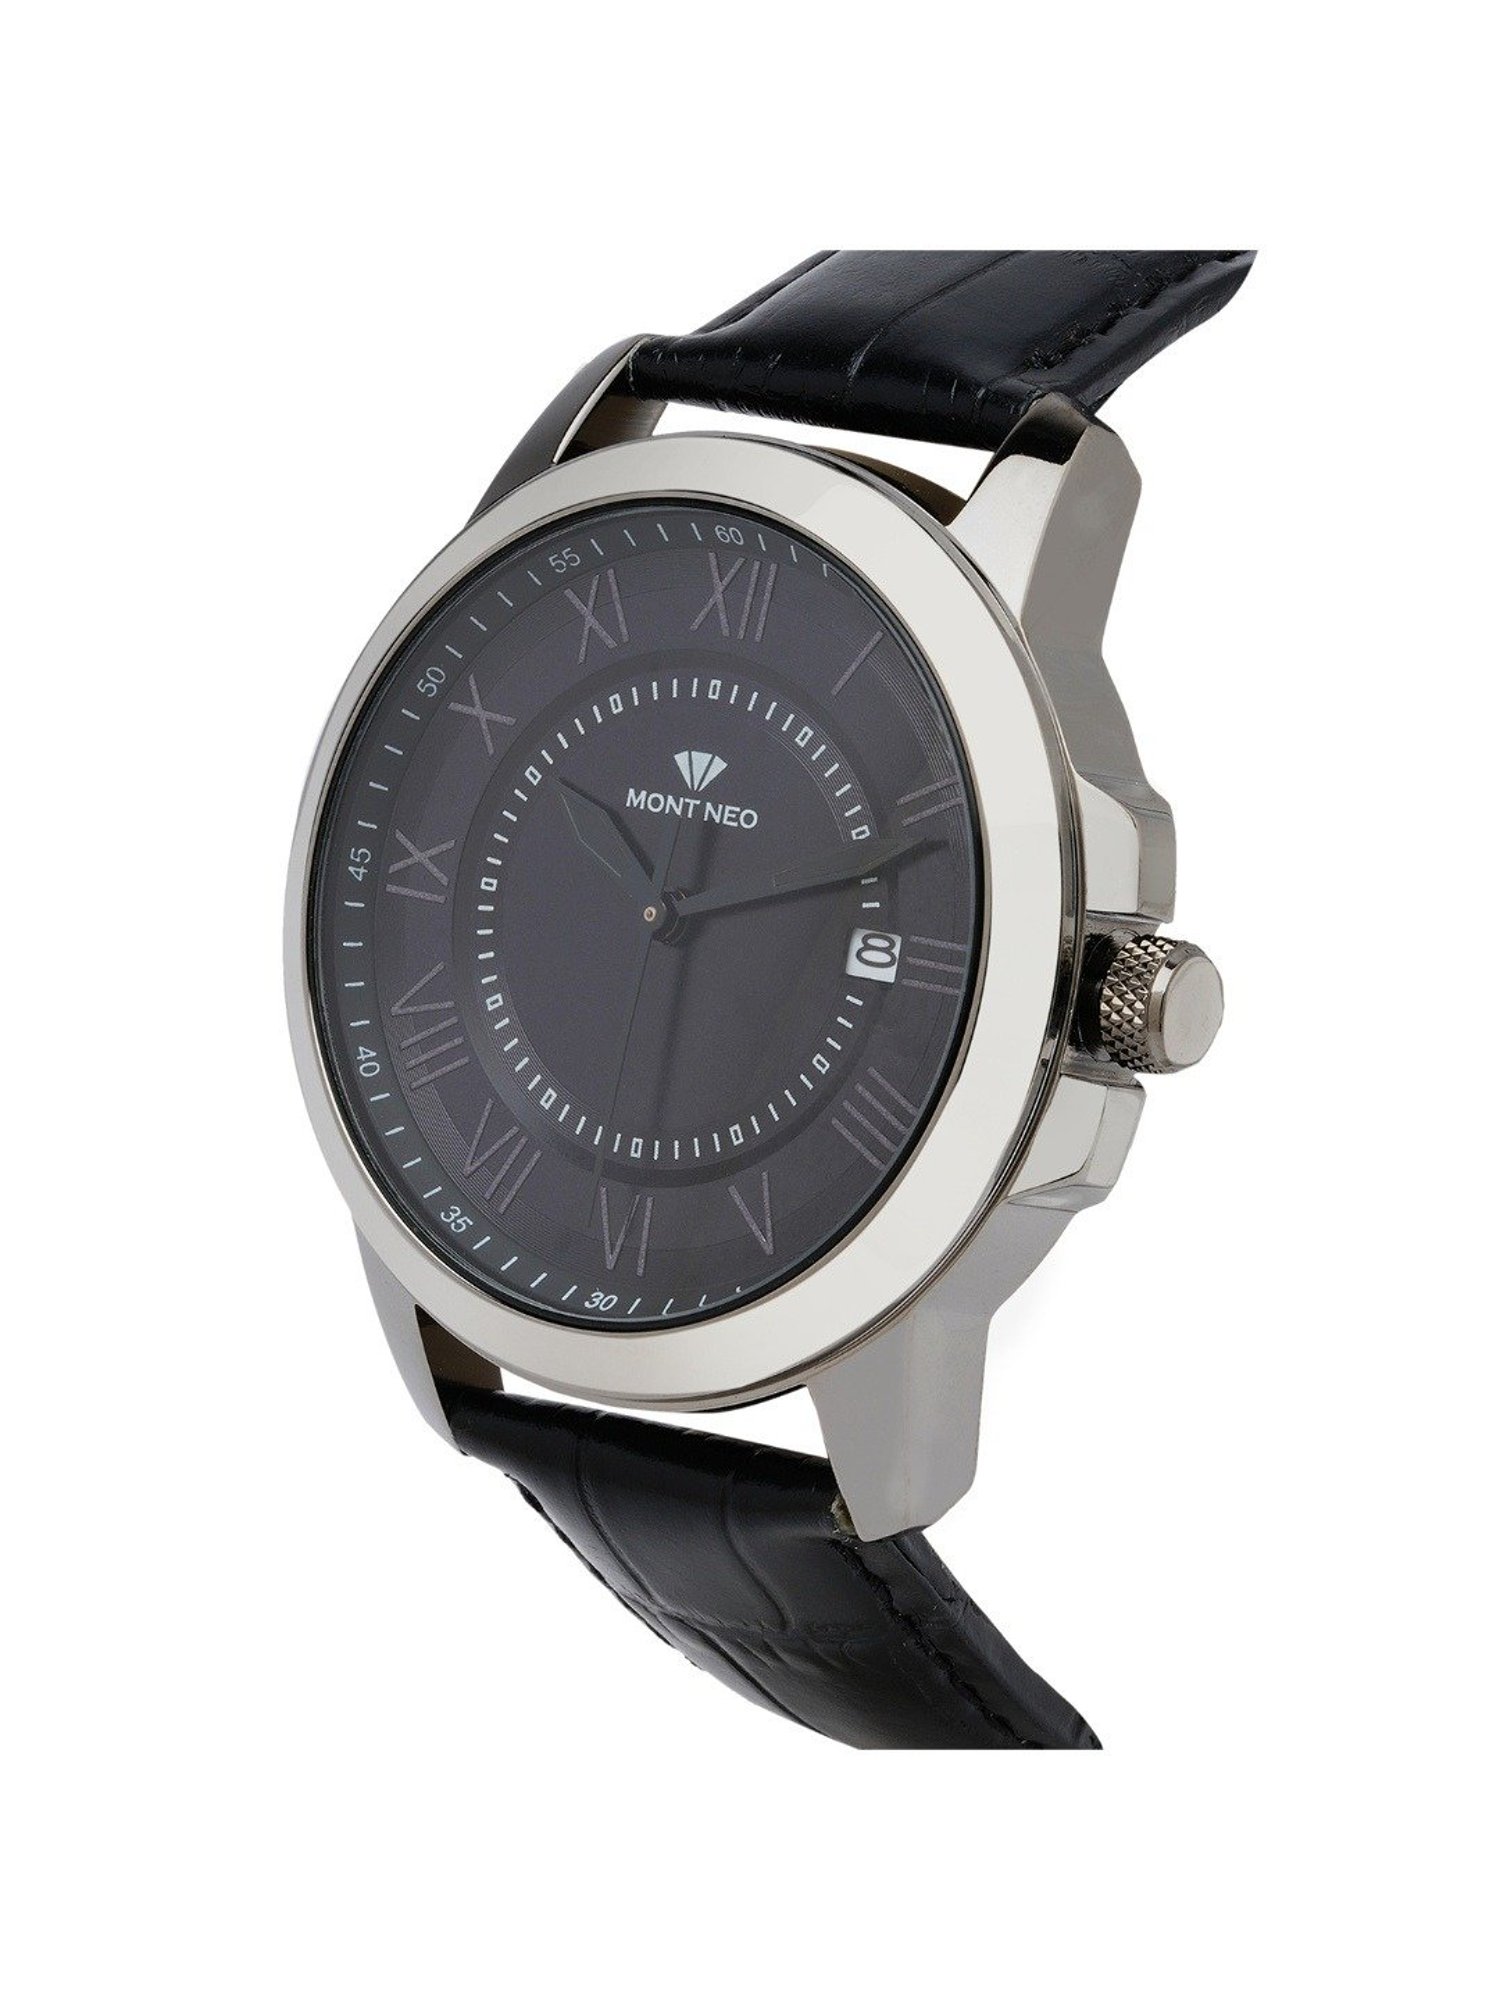 PROVOGUE Analog Watch - For Men - Buy PROVOGUE Analog Watch - For Men  P50-01 Online at Best Prices in India | Flipkart.com